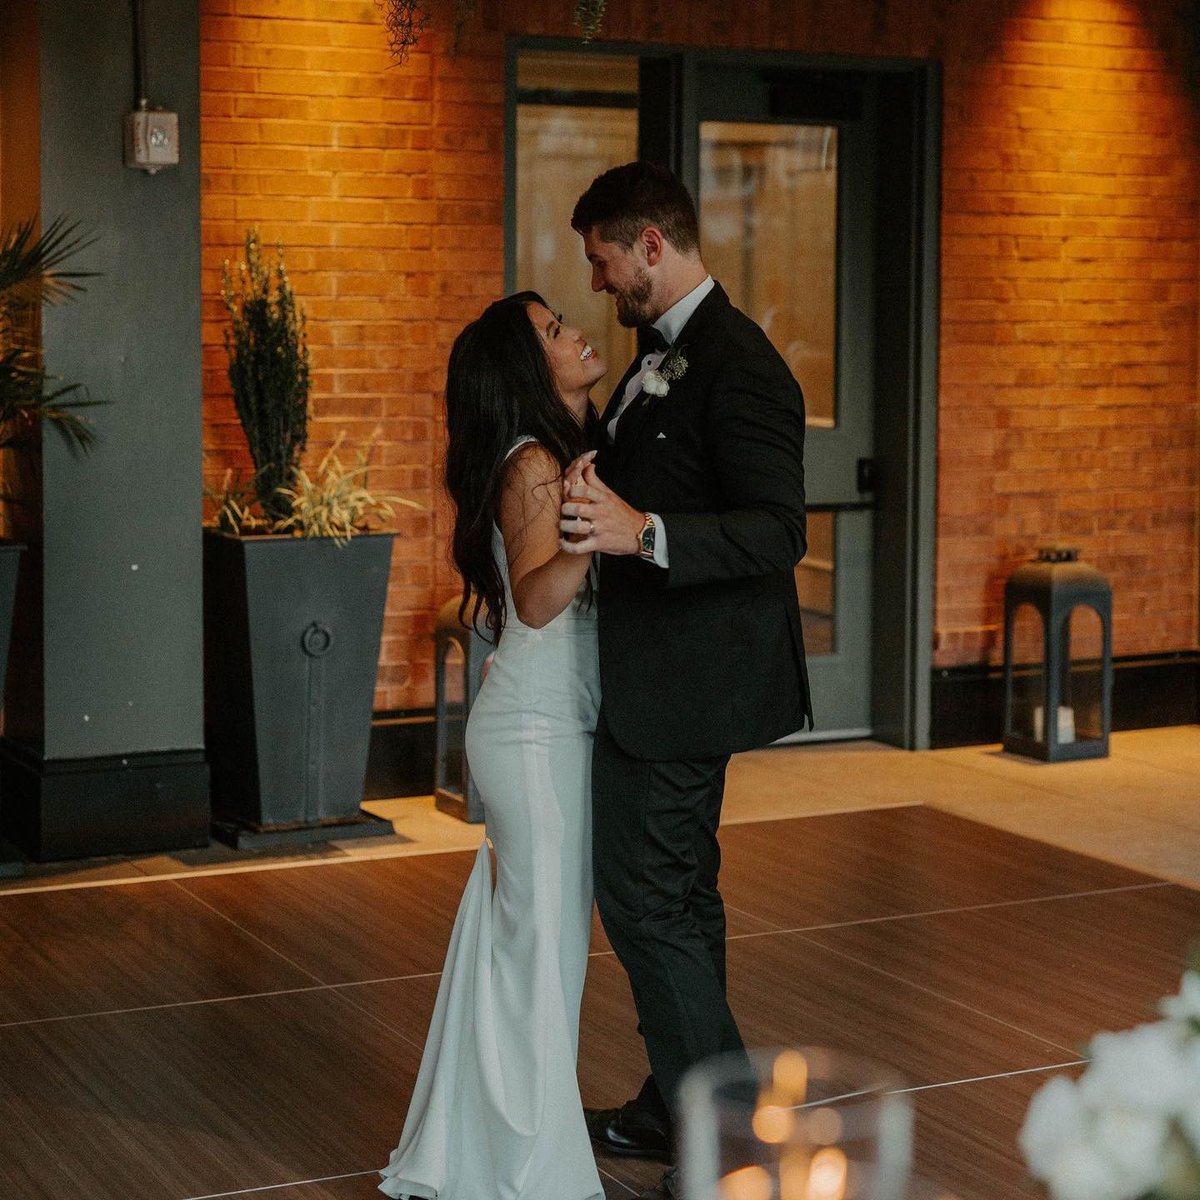 From the first kiss to the last dance, we are honored to be a part of your special day. Begin planning your dream St. Louis wedding using the link in our bio.⁠ ⁠ #RCMemories via @yinnieefan